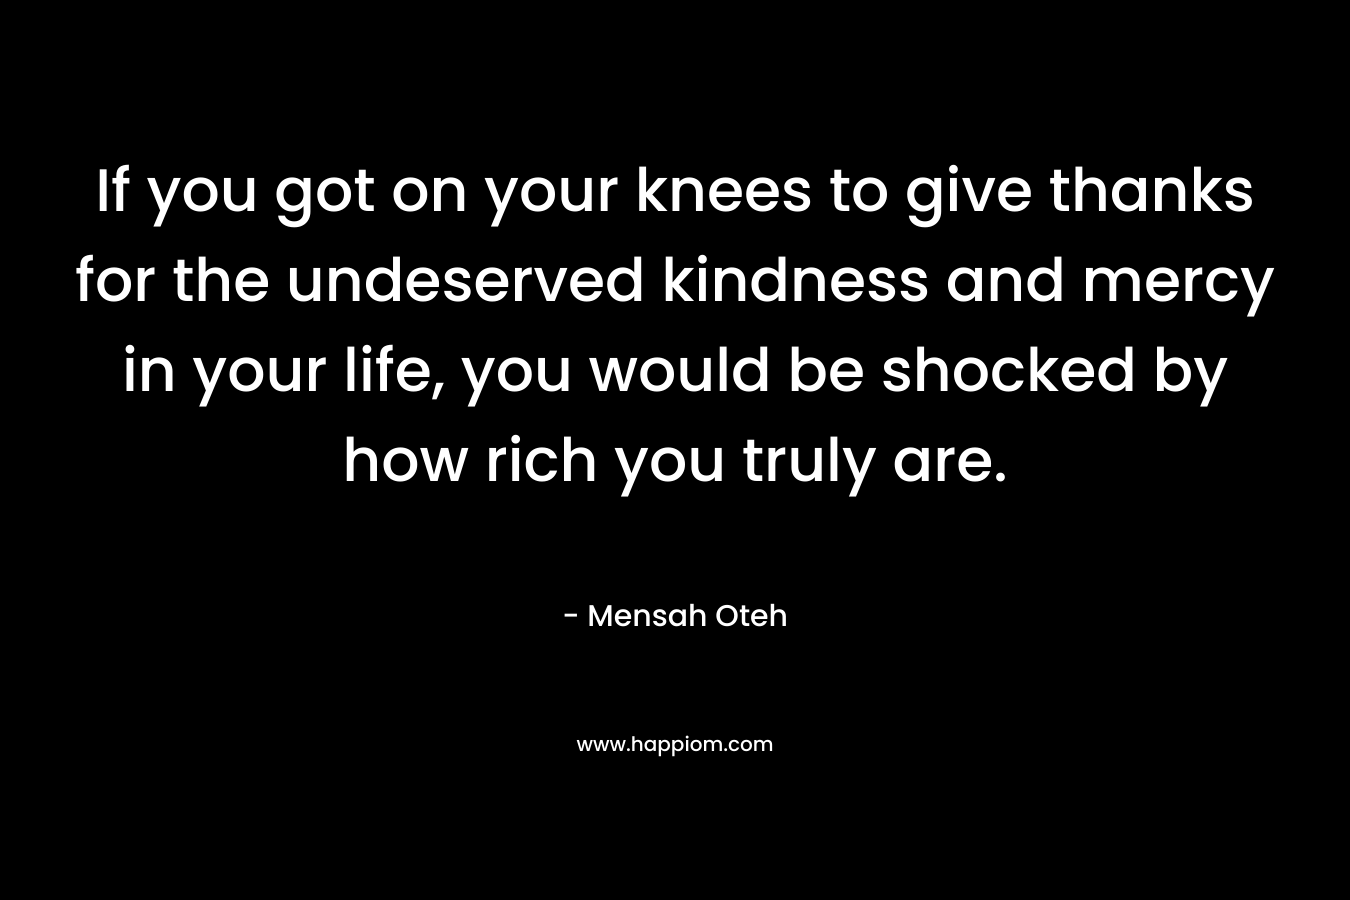 If you got on your knees to give thanks for the undeserved kindness and mercy in your life, you would be shocked by how rich you truly are.